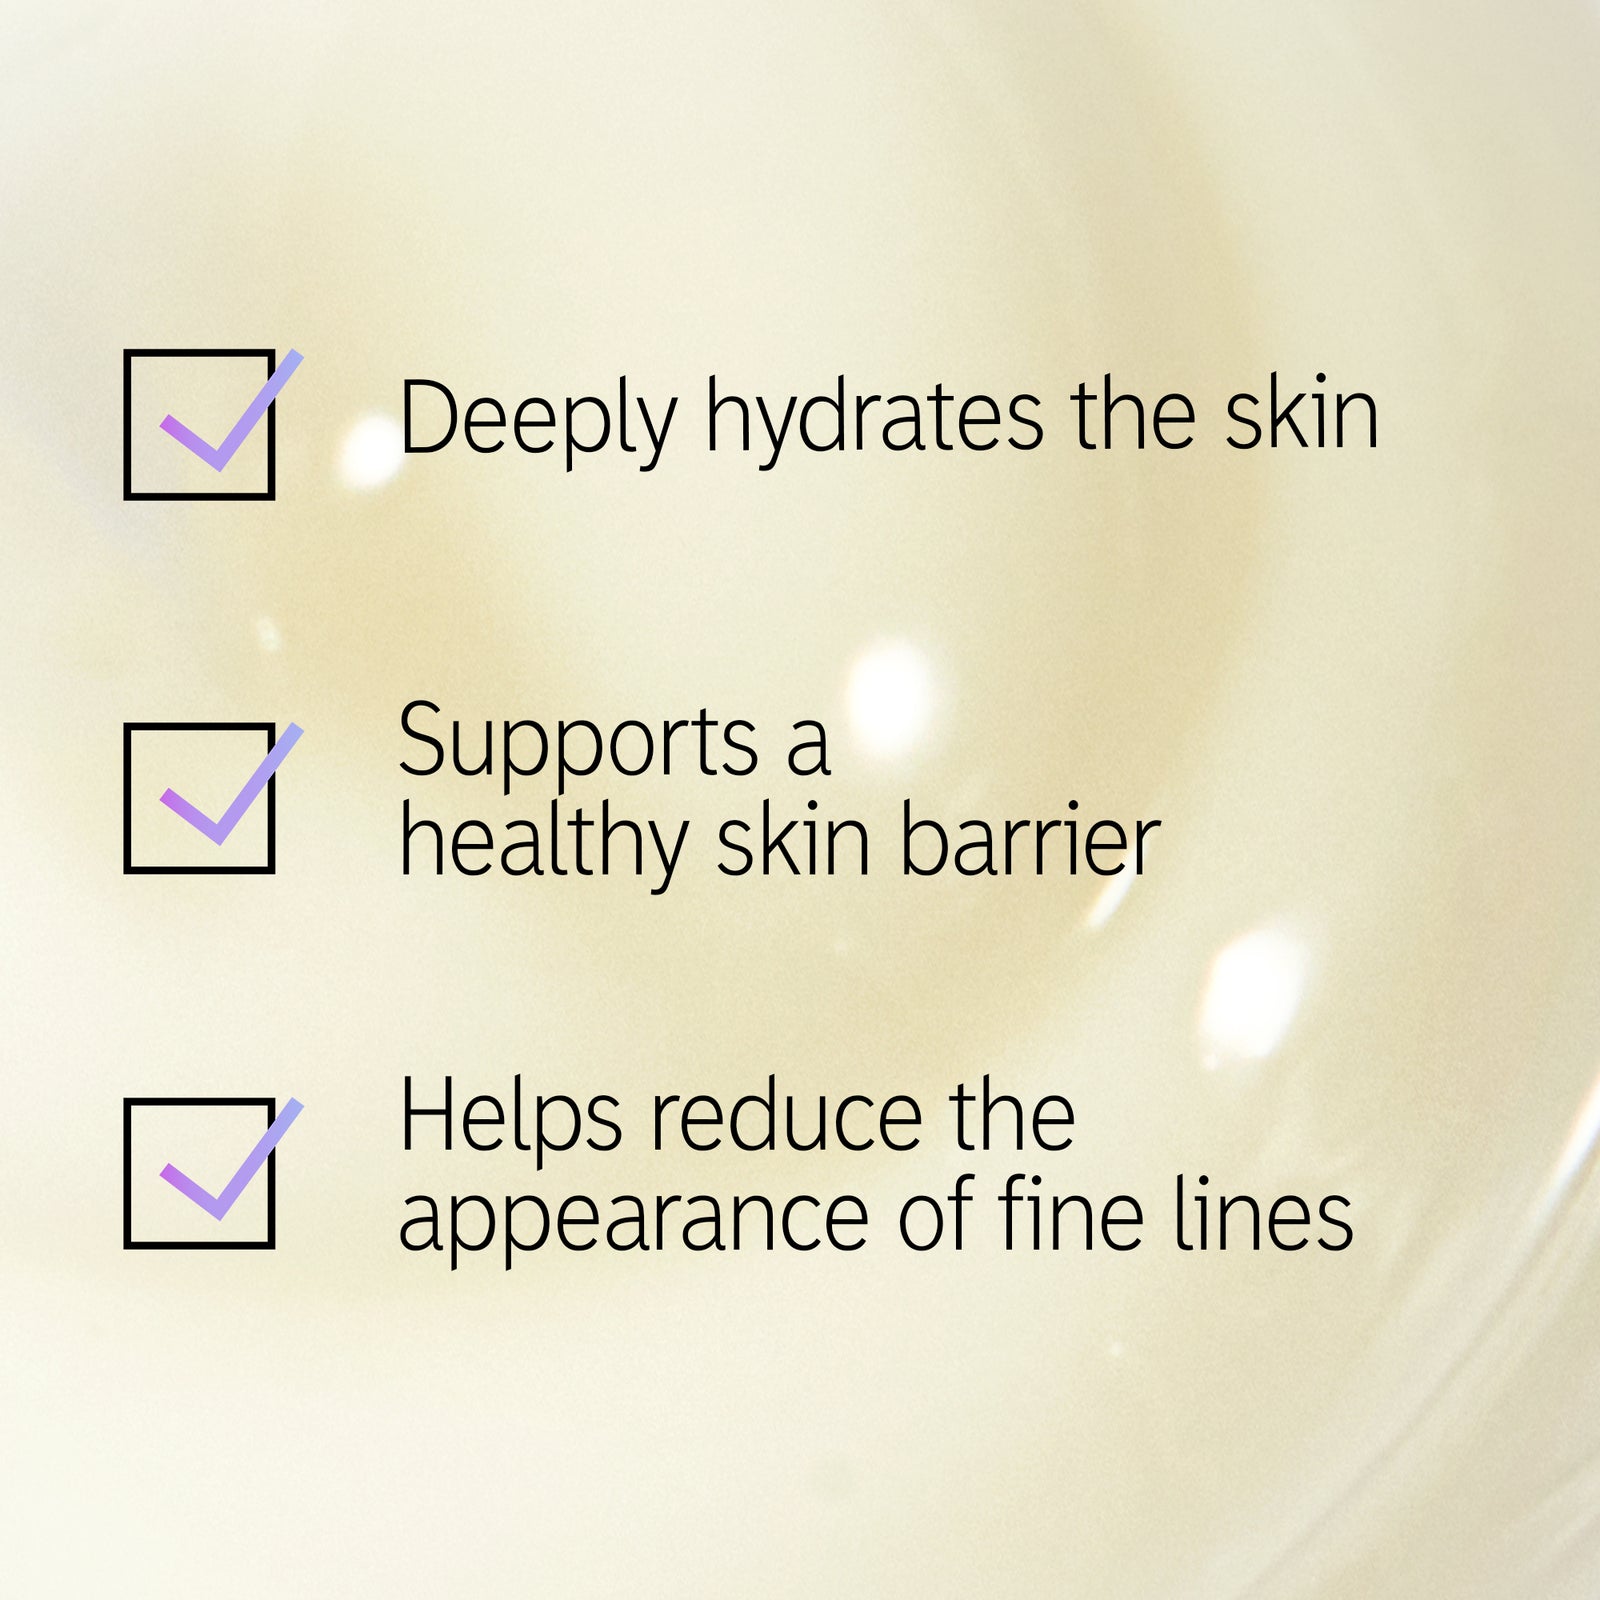 Essential Hydration Trio texture shot with text overlay listing the 3 main benefits